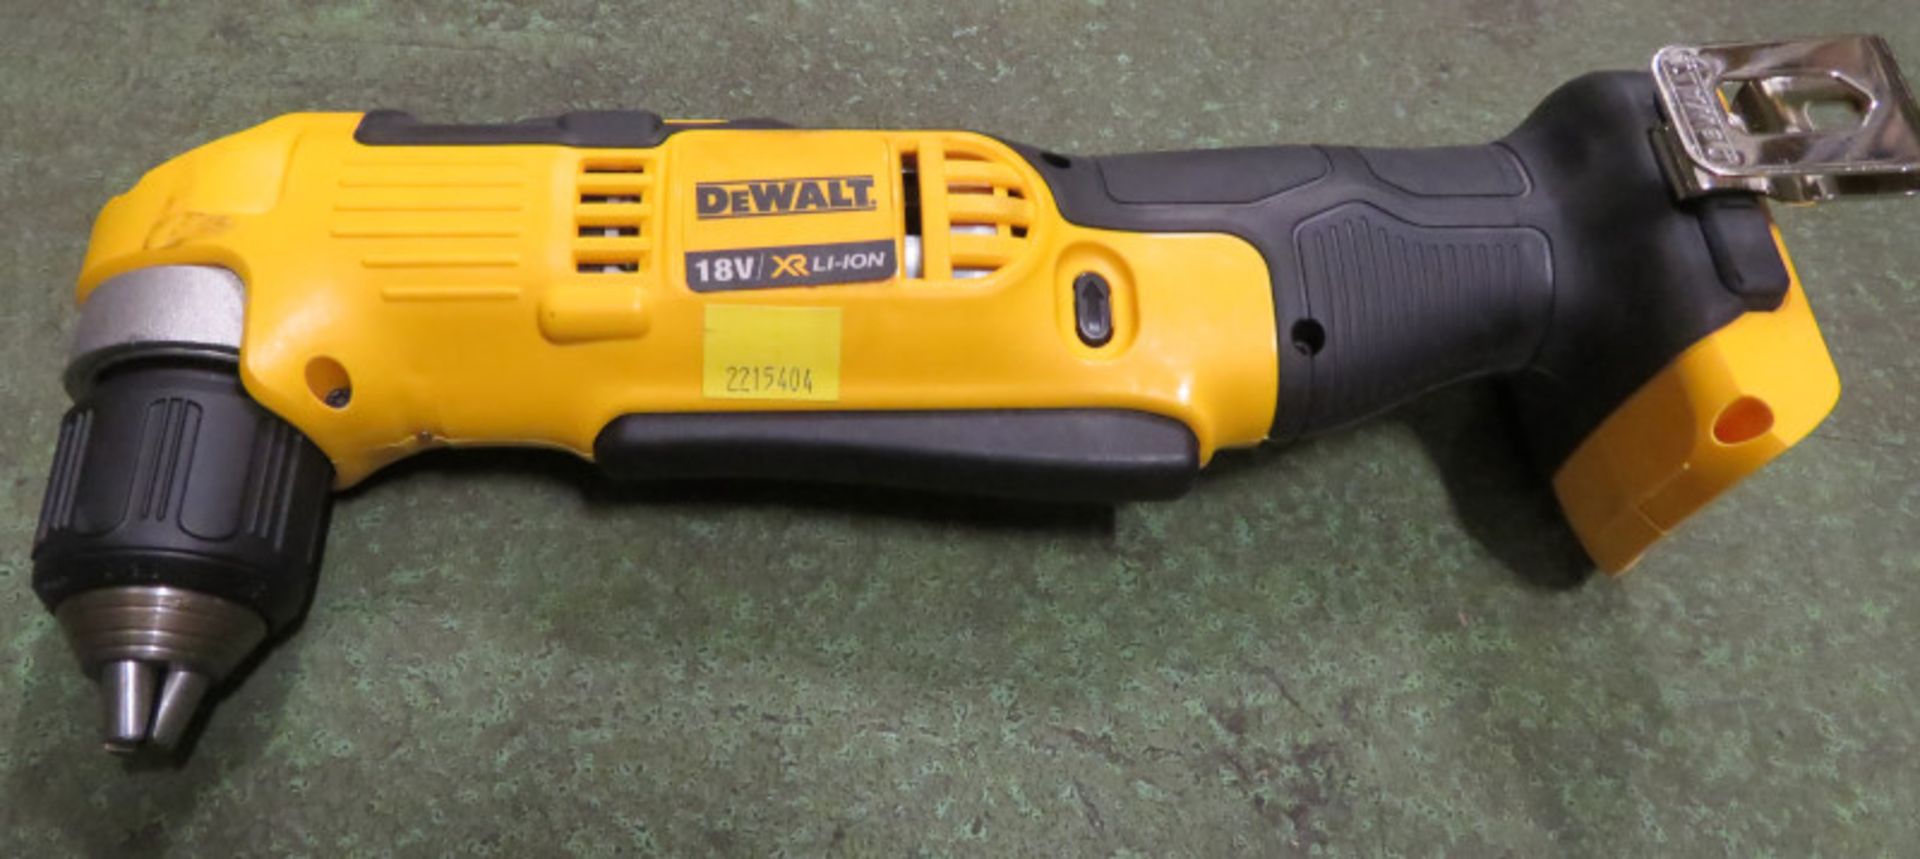 Dewalt DCD740 right angle drill, 18V / XR Li-Ion with charger, 1 battery